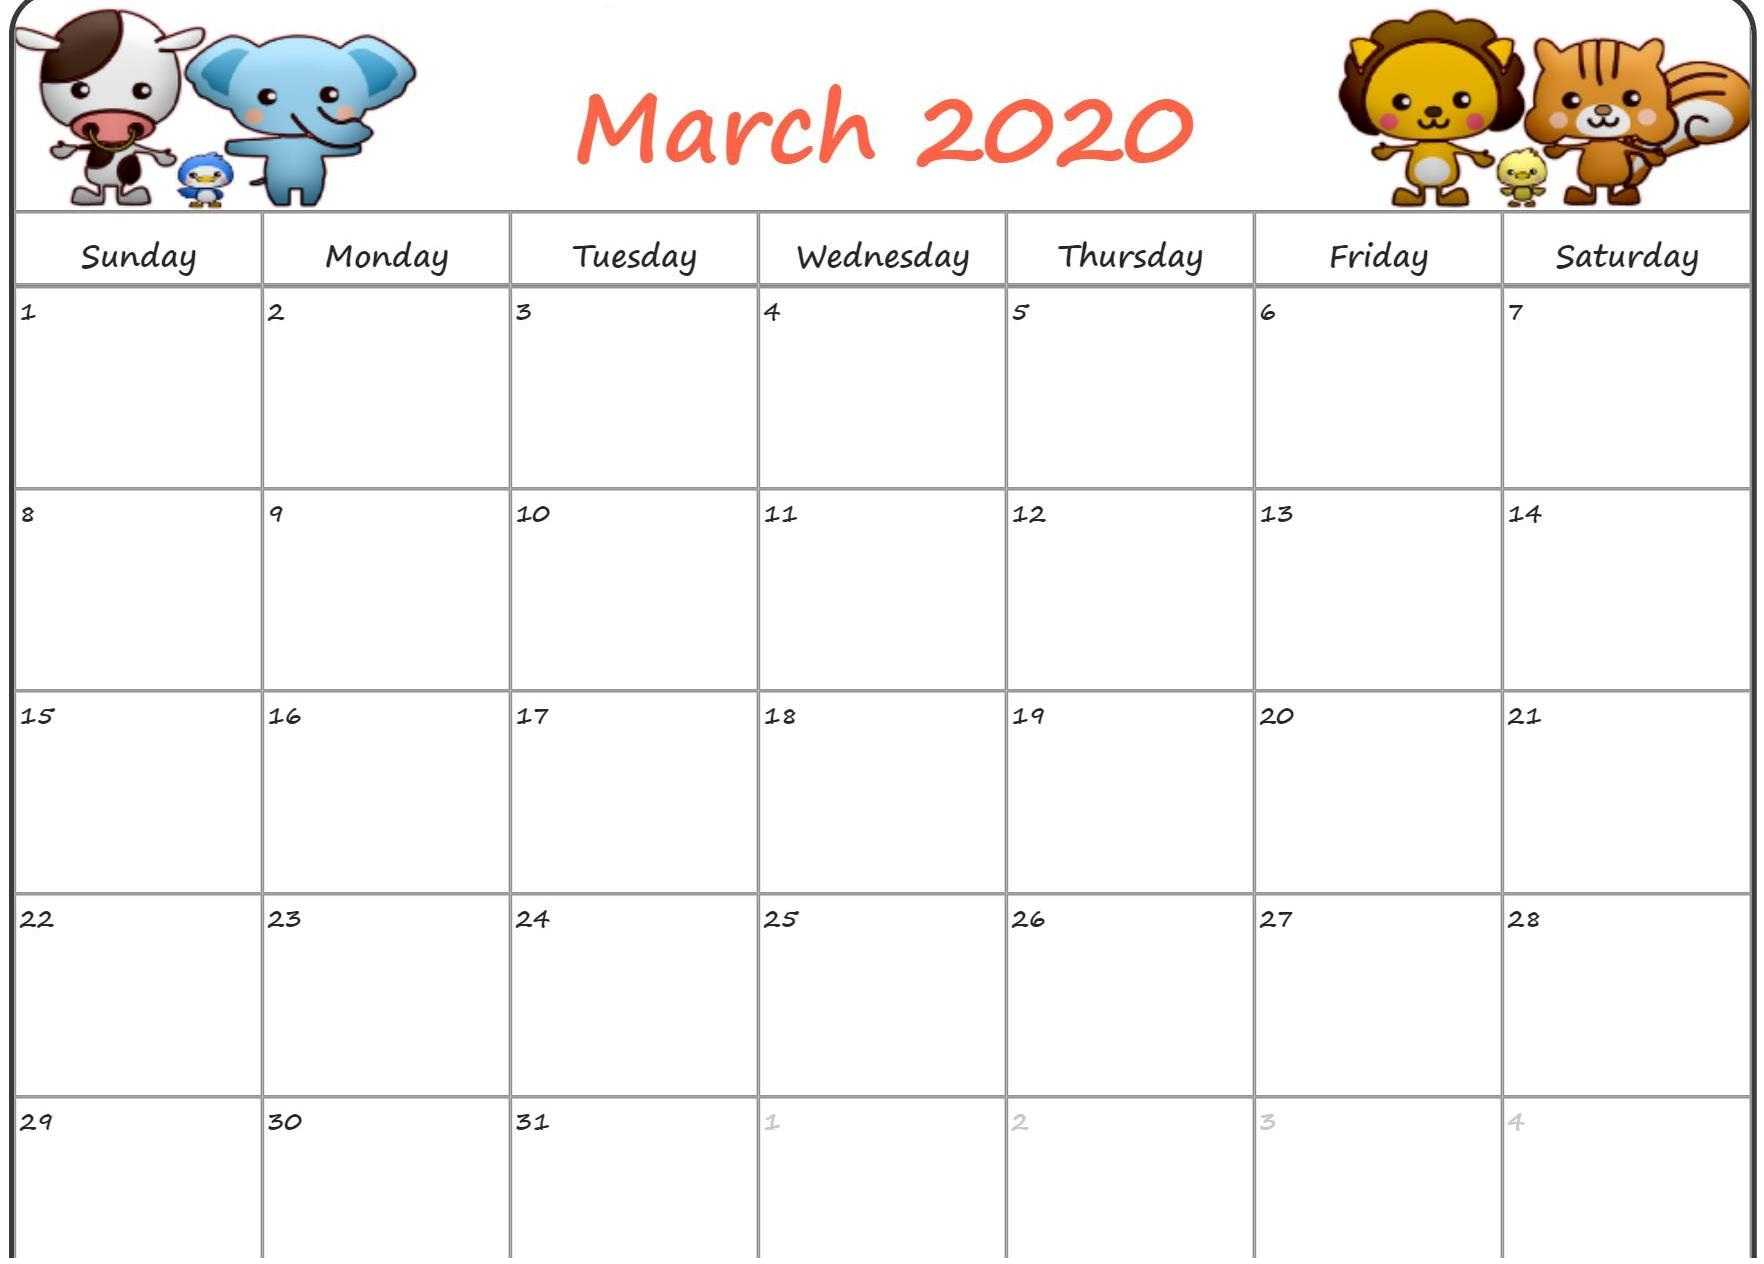 March 2020 Calendar Pdf Free For Daily Use | Free Printable For Blank Calendar Template For Kids